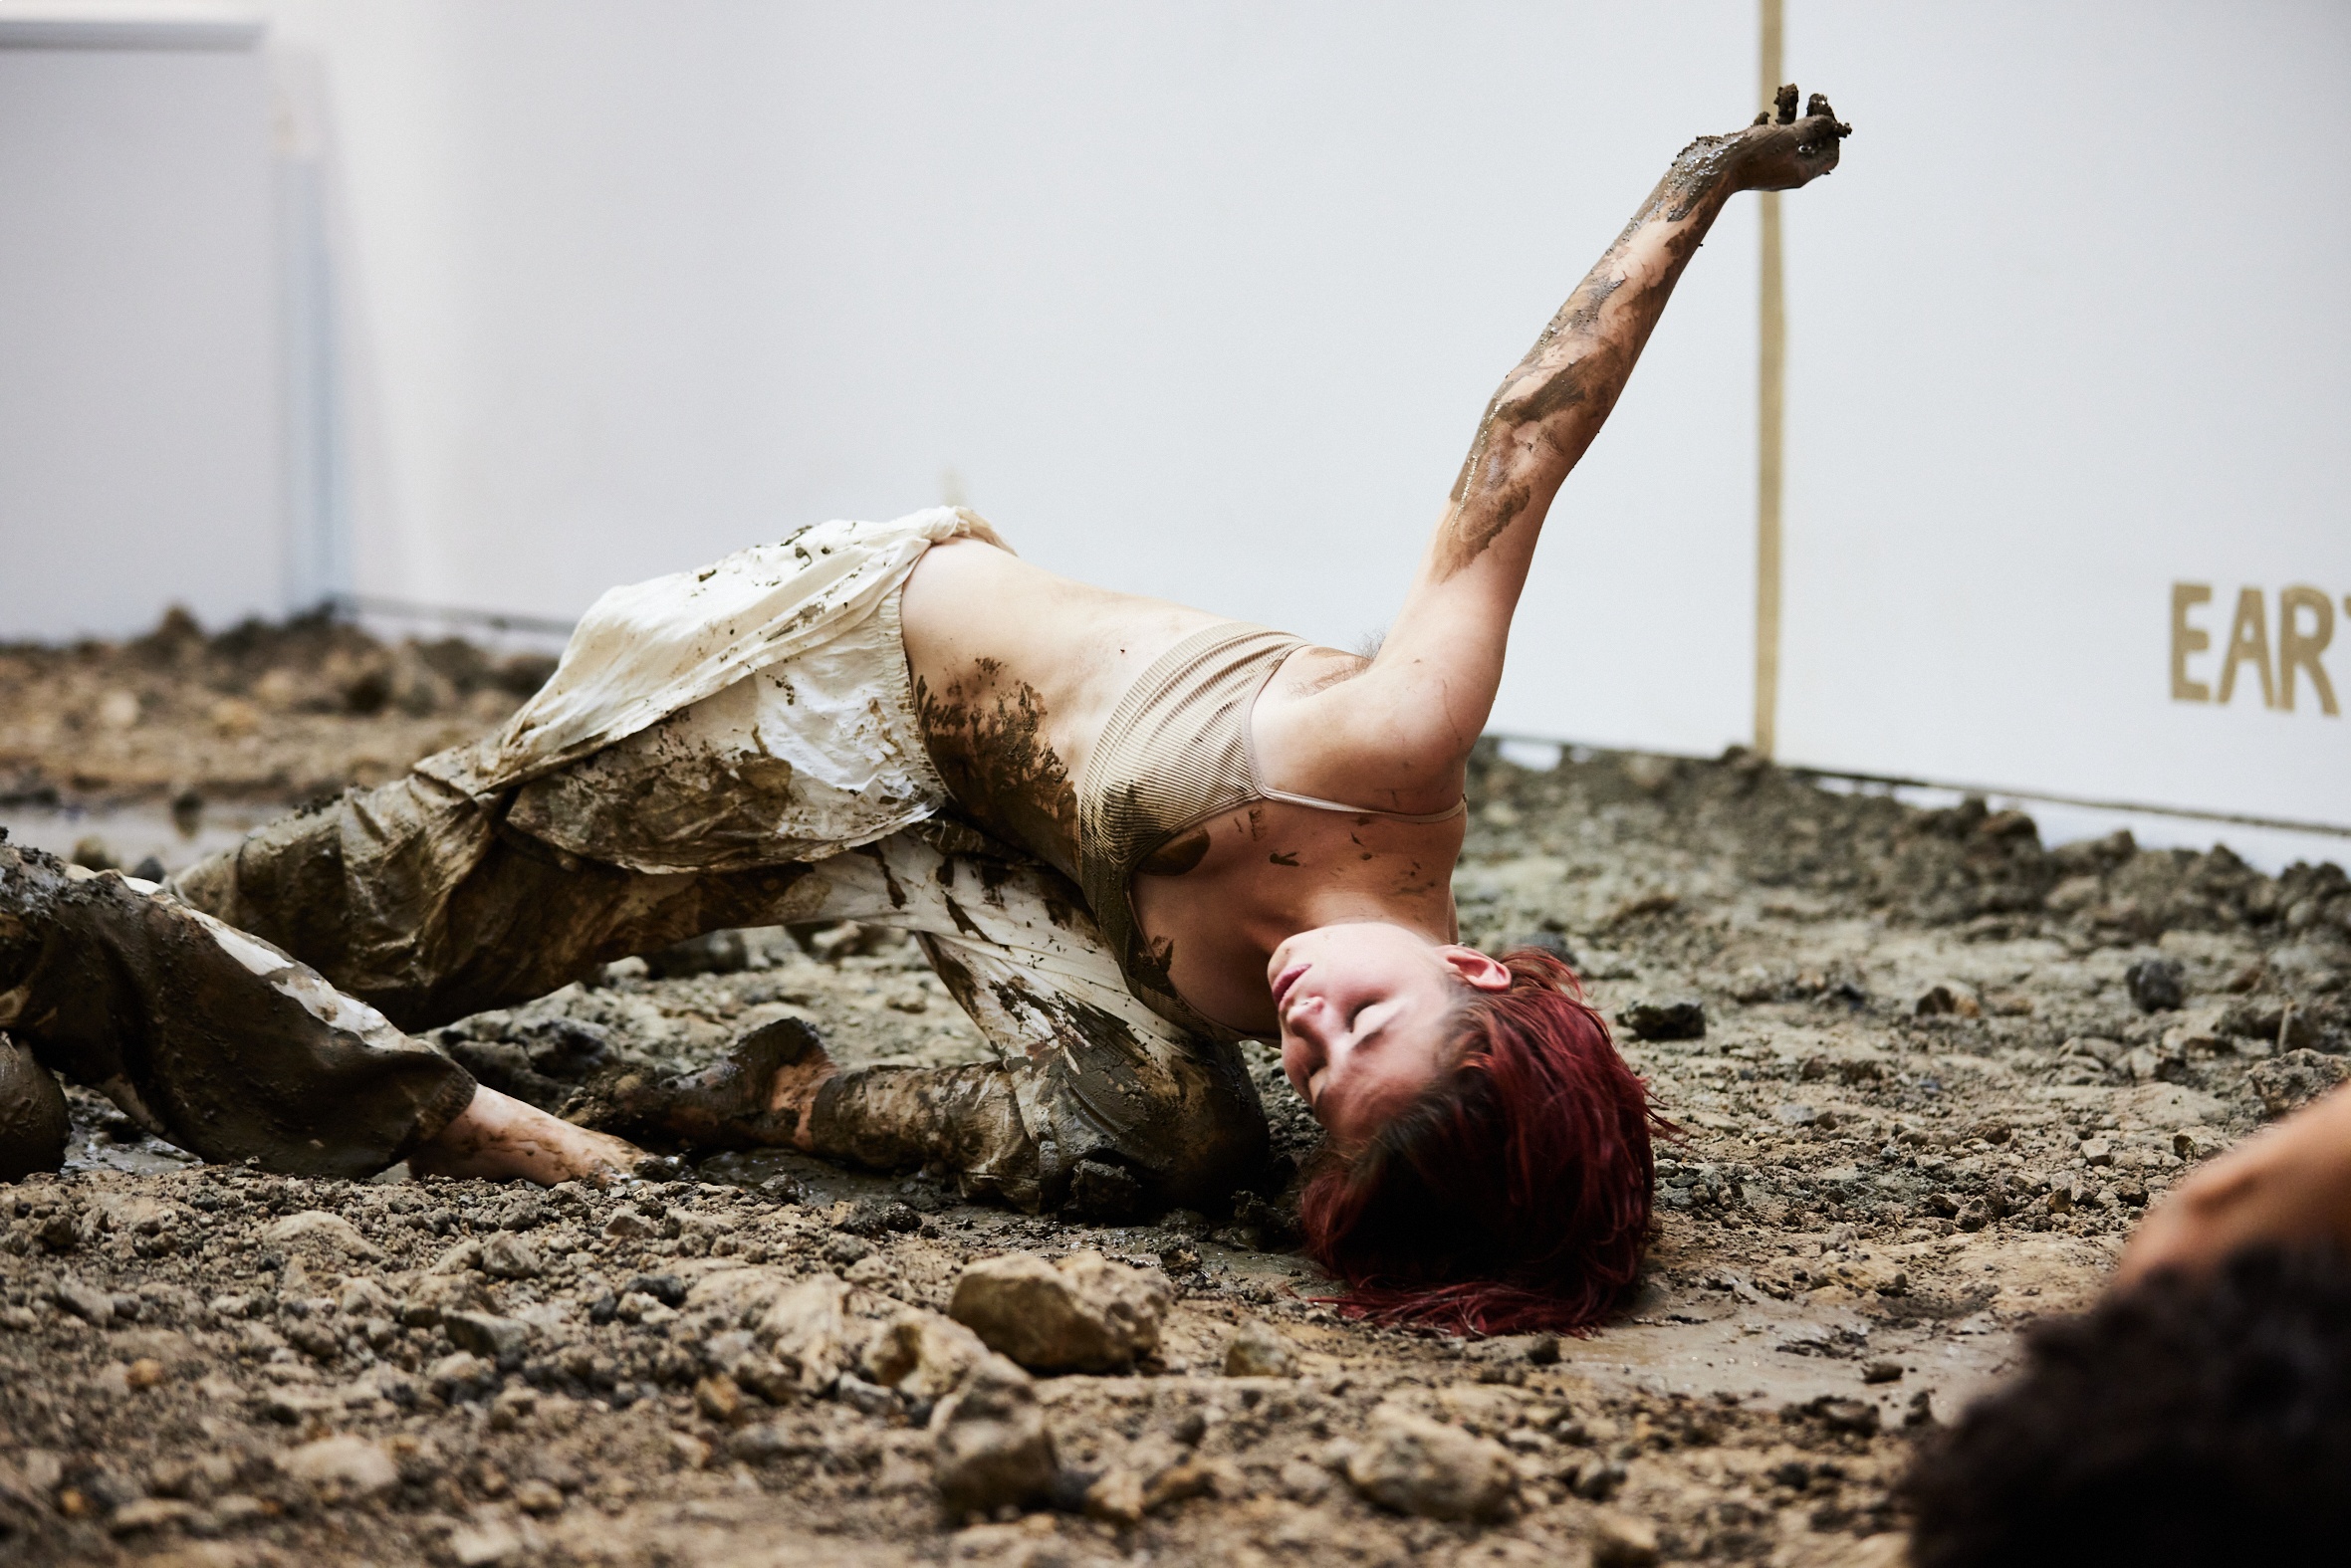 A white female dancer with red hair performs in a white gallery space on a bed of mud and rocky landscape, an installation by an artist. Her clothes and hands are covered in mud